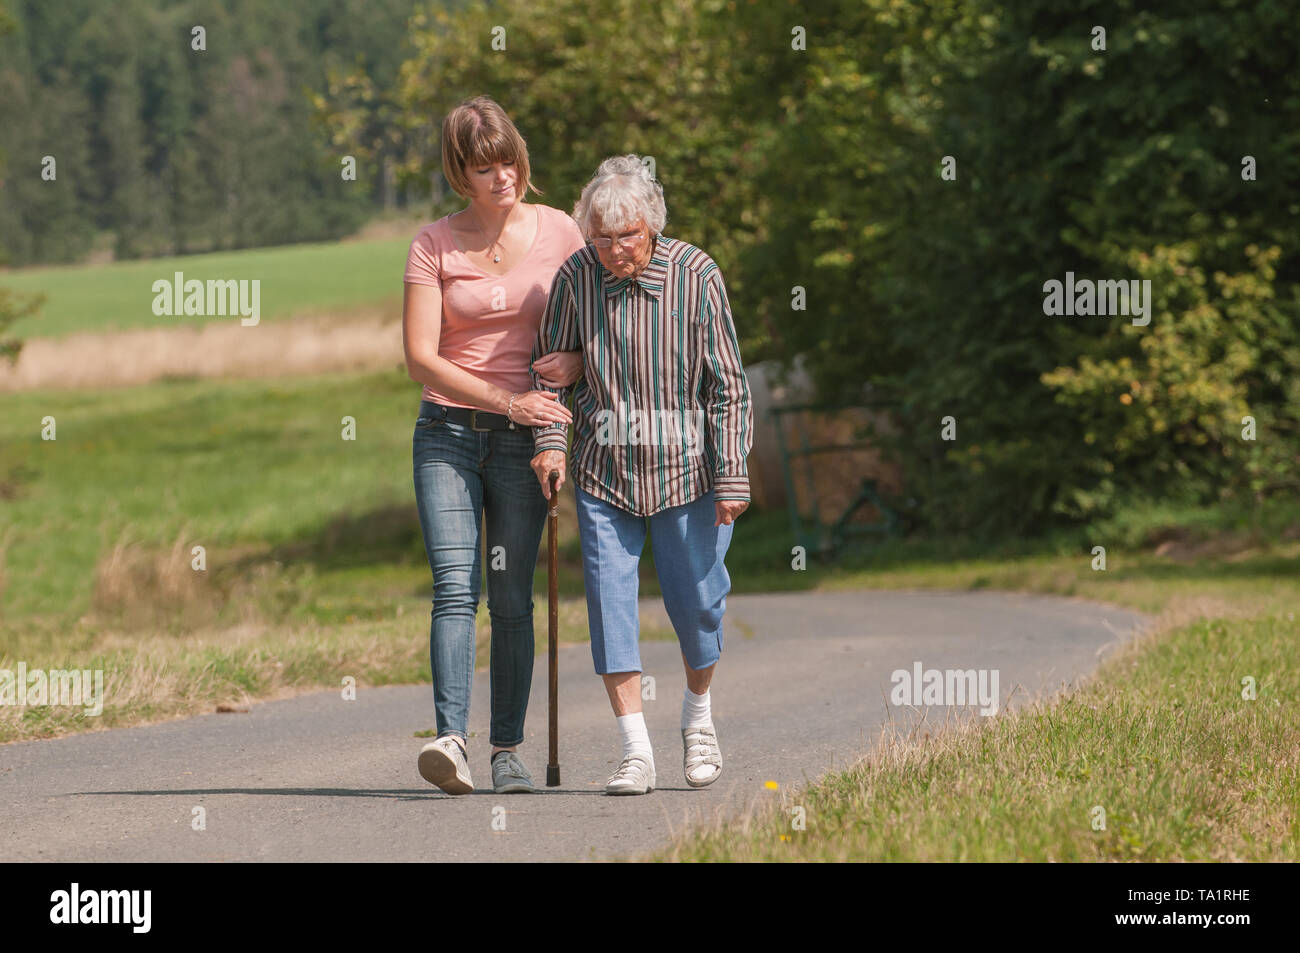 Young woman helping senior woman walking with stick Stock Photo